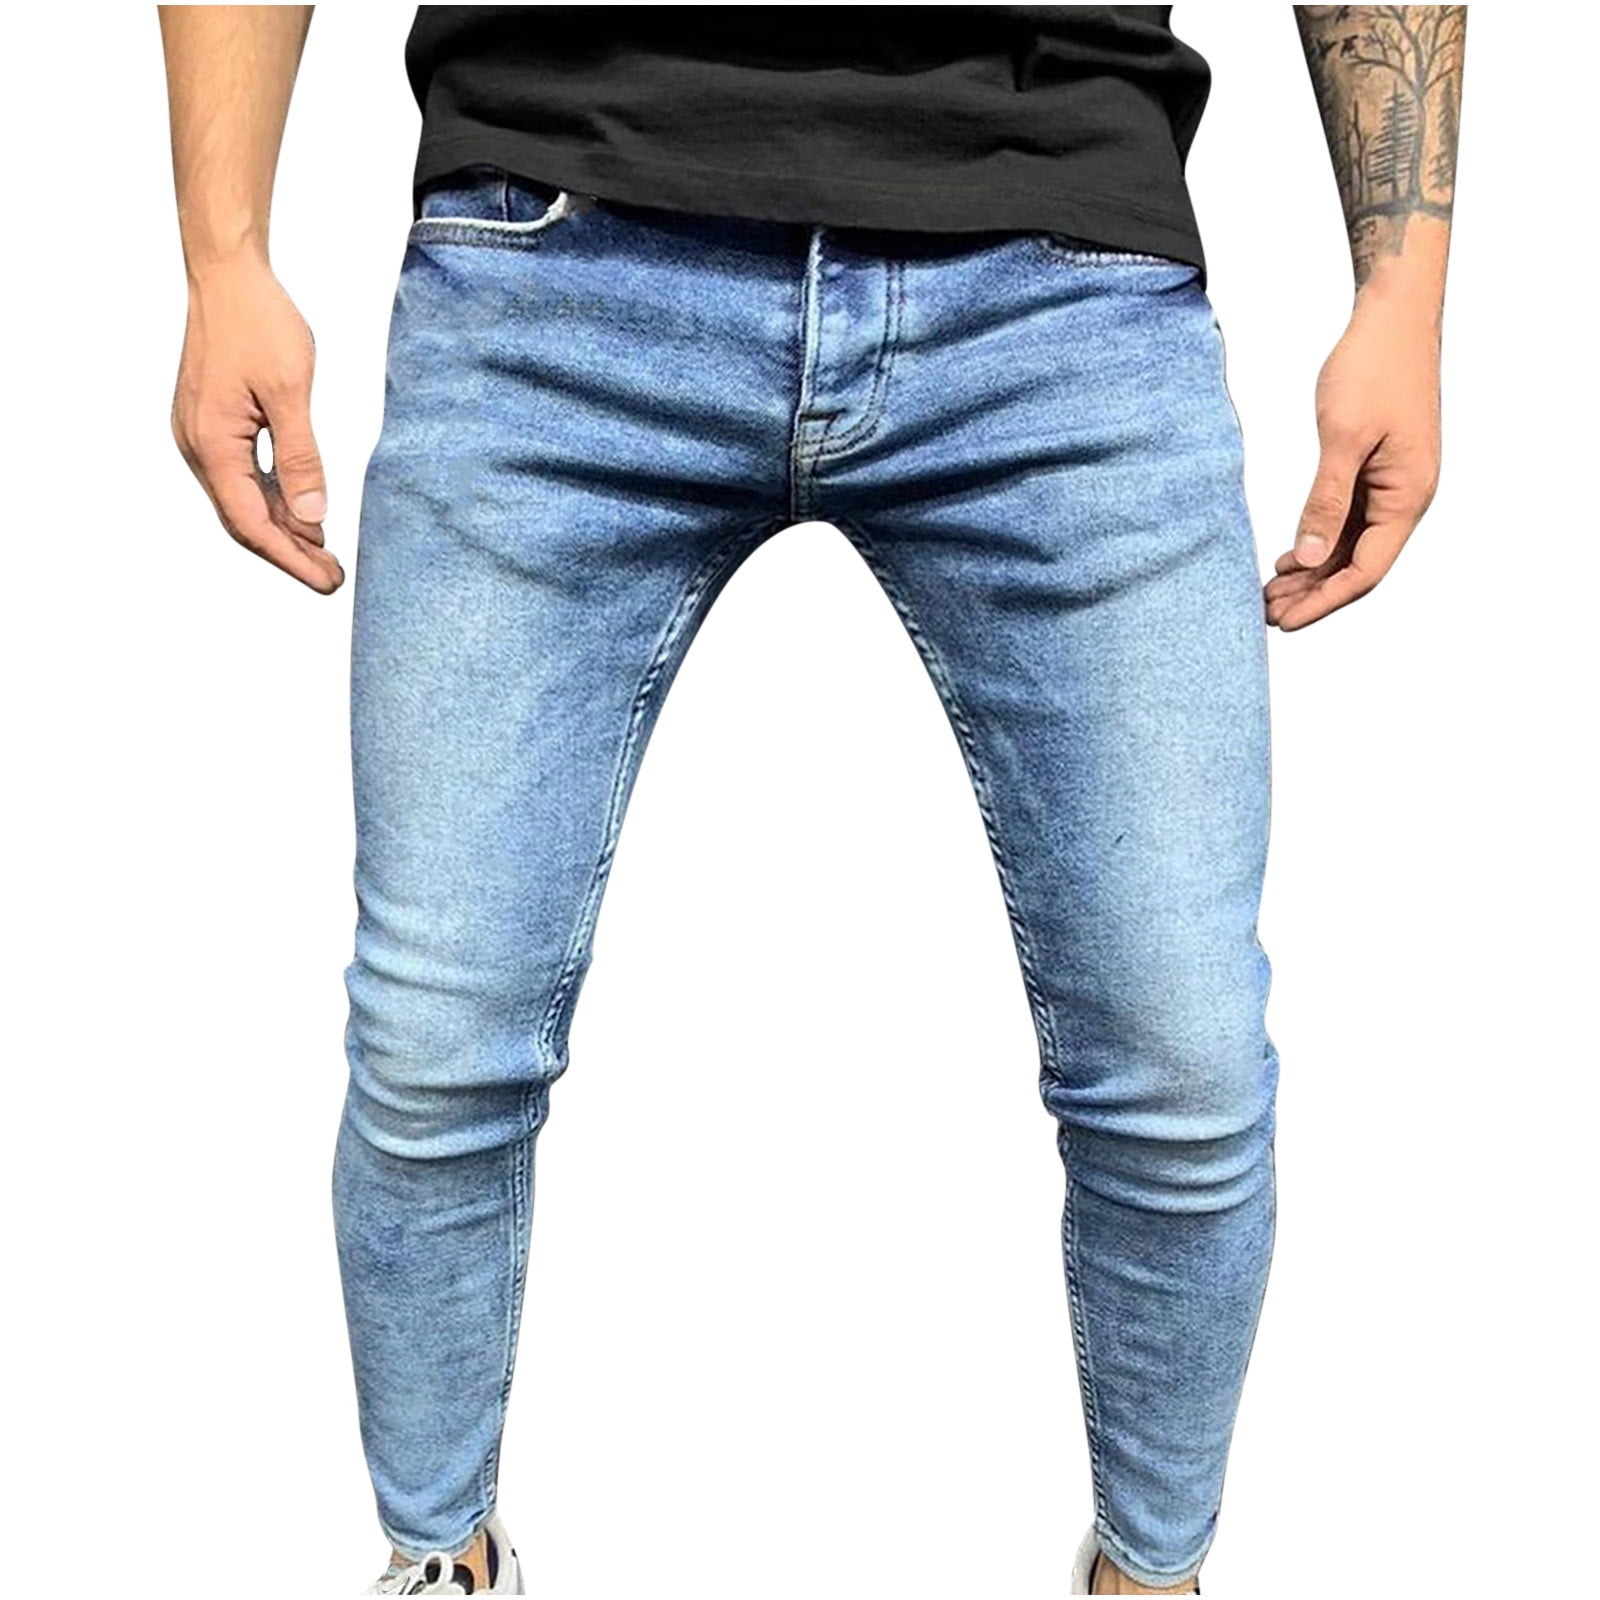 526Jeanswear Boys/Kids/Youths Skinny Stretch Ripped/Non Ripped Designer Jeans 